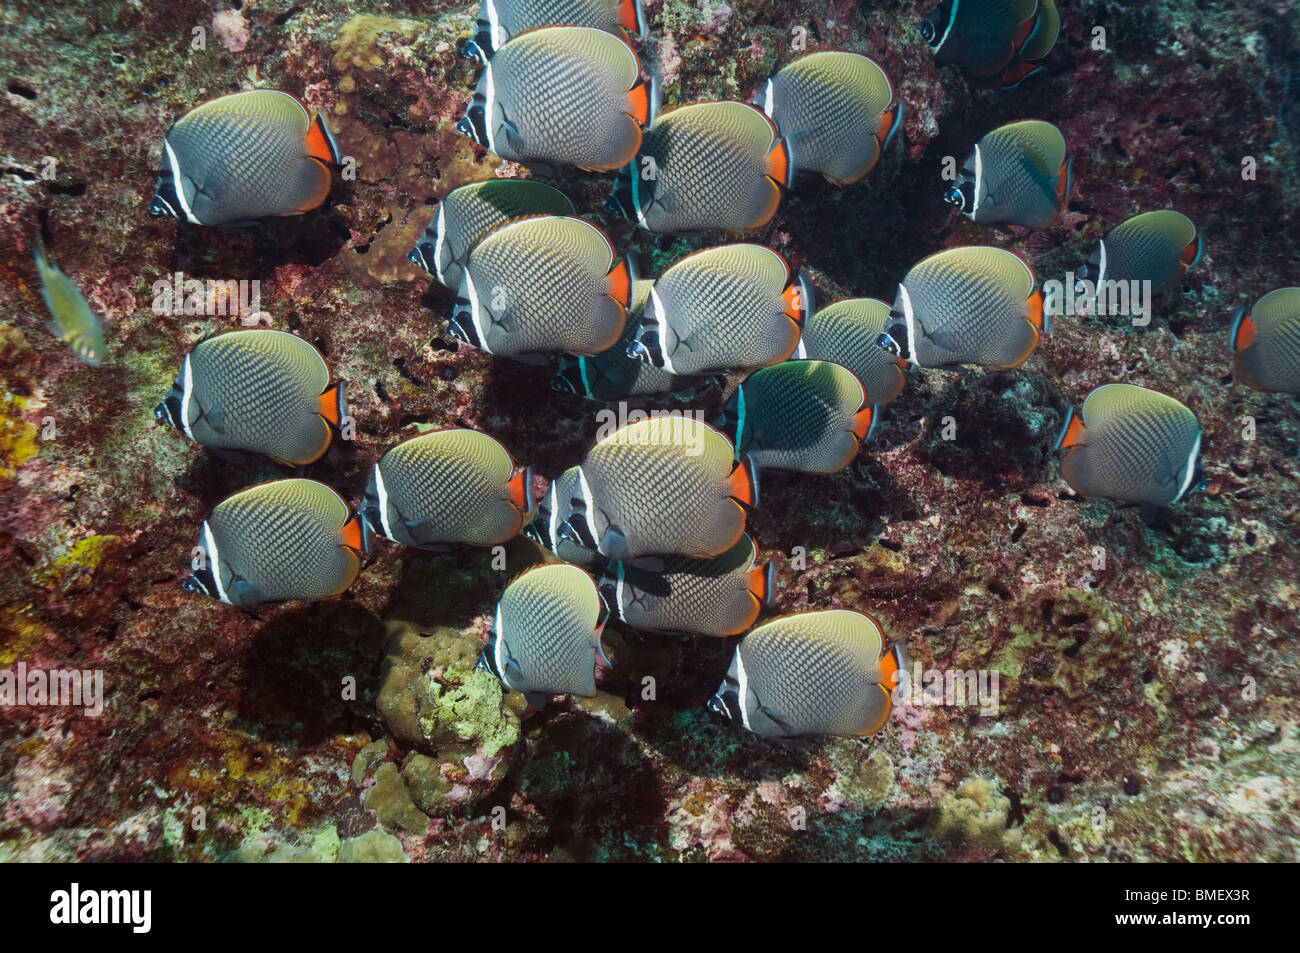 Redtail or Collared butterflyfish.  Andaman Sea, Thailand. Stock Photo